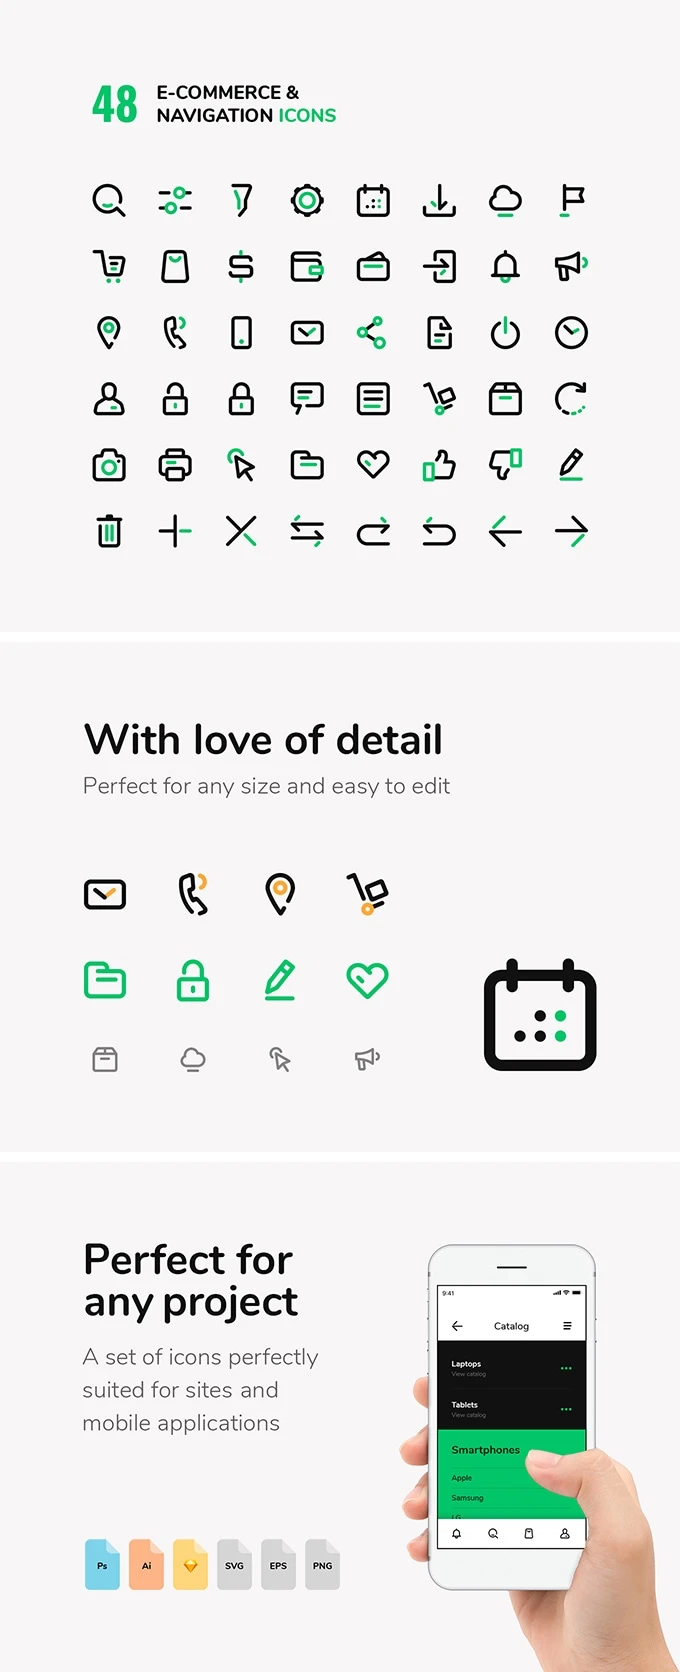 eCommerce & Navigation Icons Set - These new 48 vector icons, which are easily editable and multipurpose can solve problems of visual maintenance once and forever. Made in minimalism, they are suitable for iOS, Android & Web.